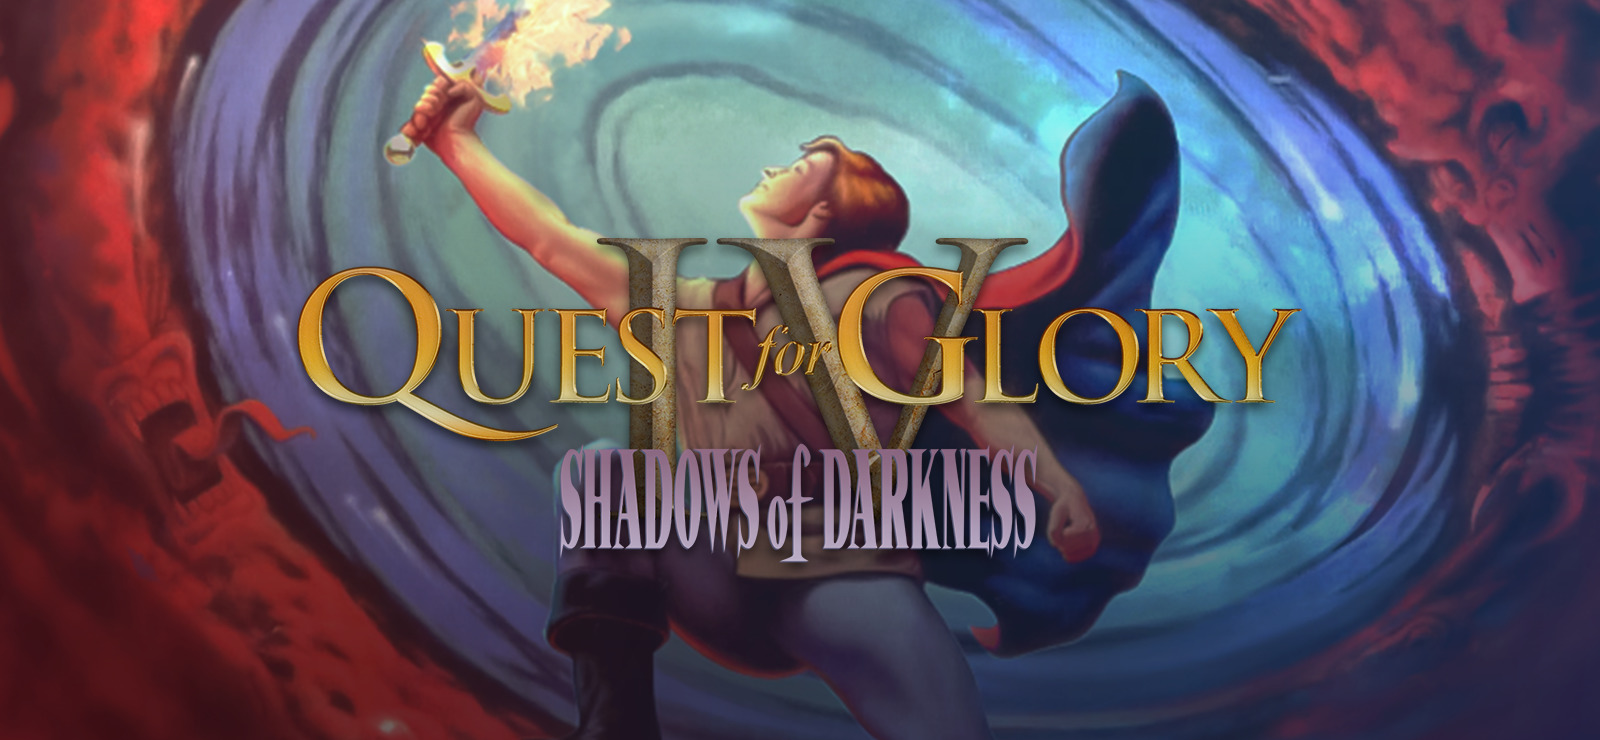 quest-for-glory-shadows-of-darkness-cd-images-launchbox-games-database